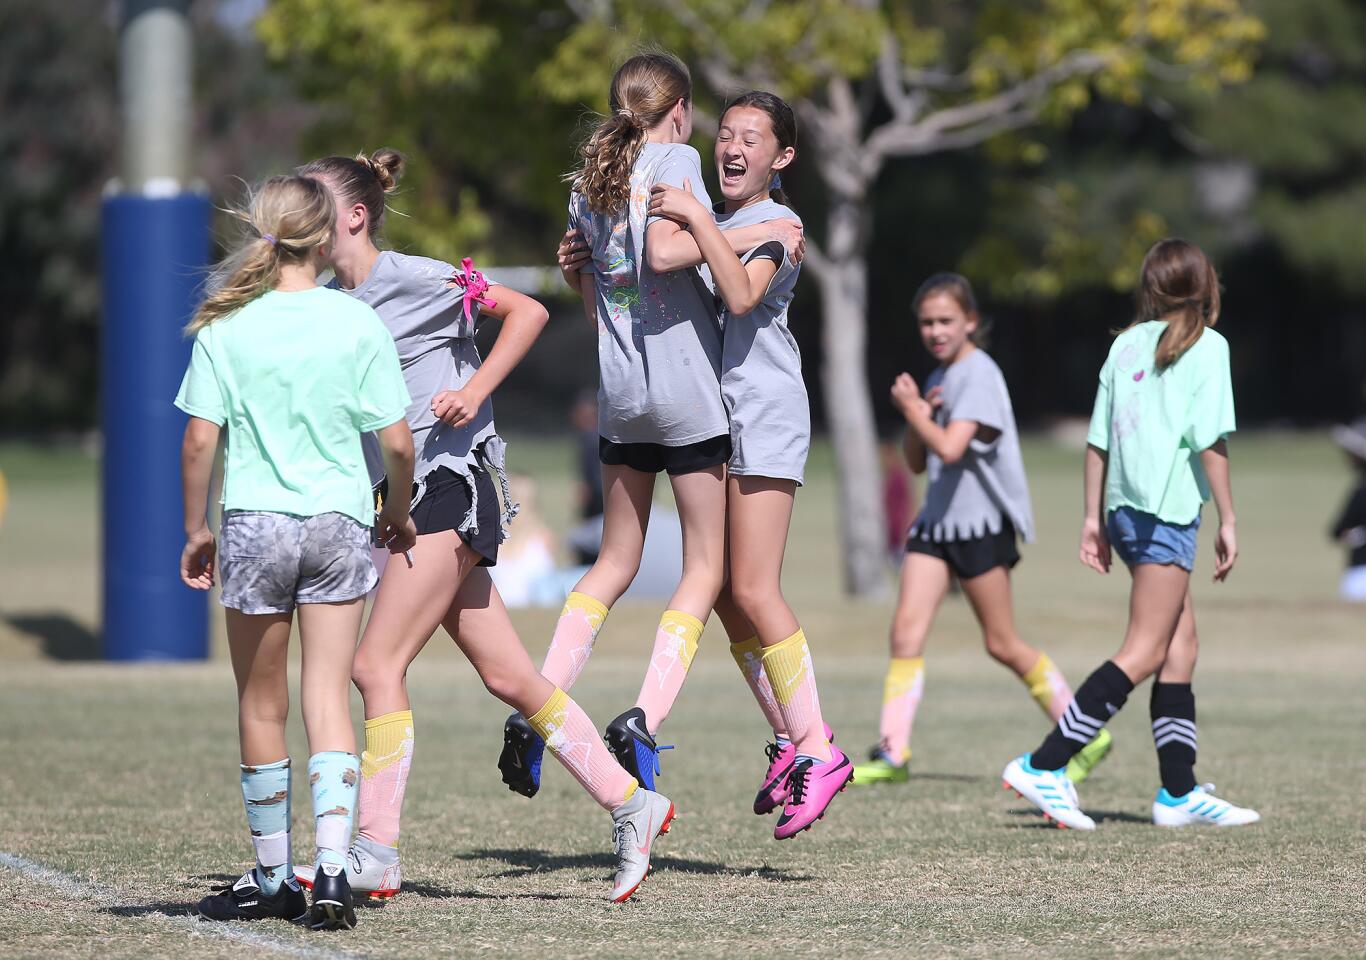 Our Lady Queen of Angels player Kyla Grant, in pink shoes, celebrates a goal with a teammate after she scored a goal against Newport Beach Eastbluff in the the girls’ fifth- and sixth-grade Silver Division pool-play match during the Daily Pilot Cup on Wednesday.